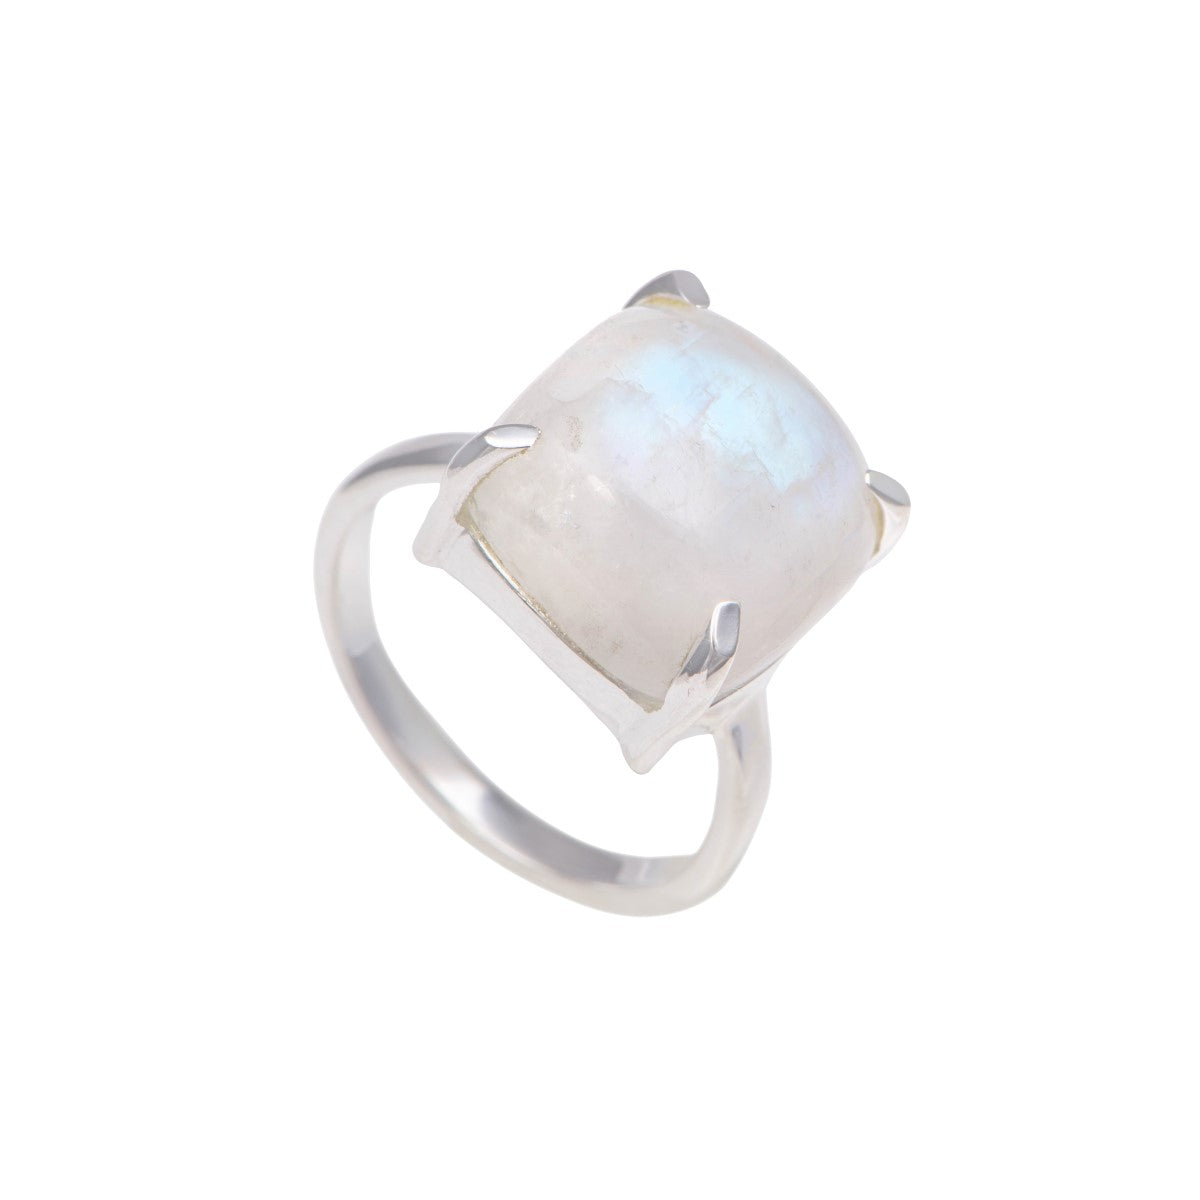 Square Cabochon Moonstone Ring in Sterling Silver